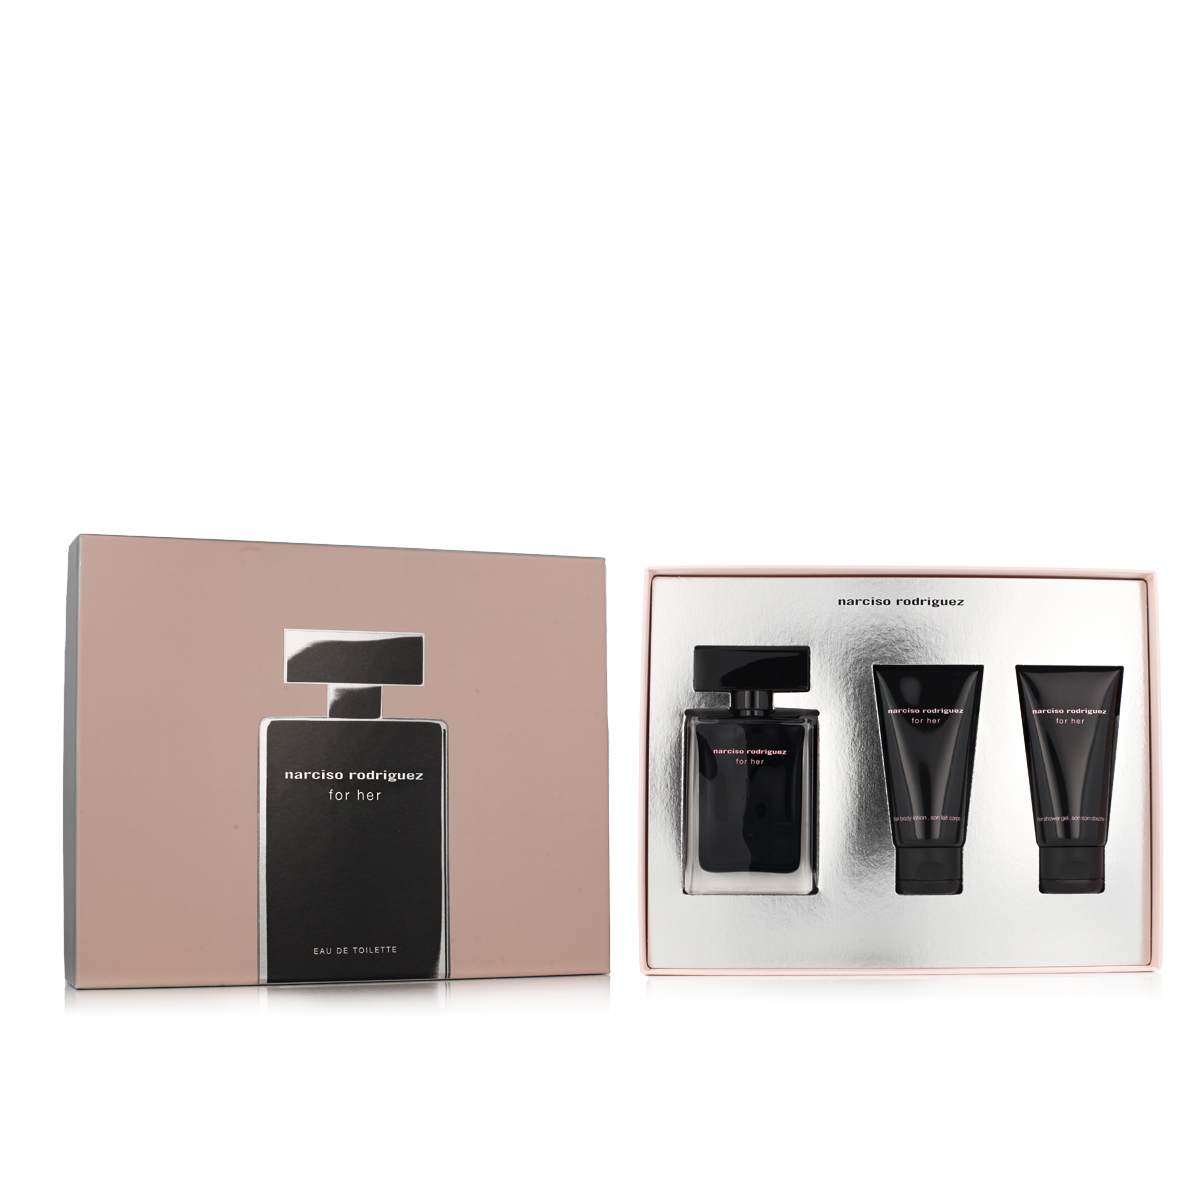 Narciso Rodriguez For Her 1St. Narciso Rodriguez For Her EDT 50 ml + SG 50 ml + BL 50 ml (woman) kvepalų mėginukas Moterims Rinkinys